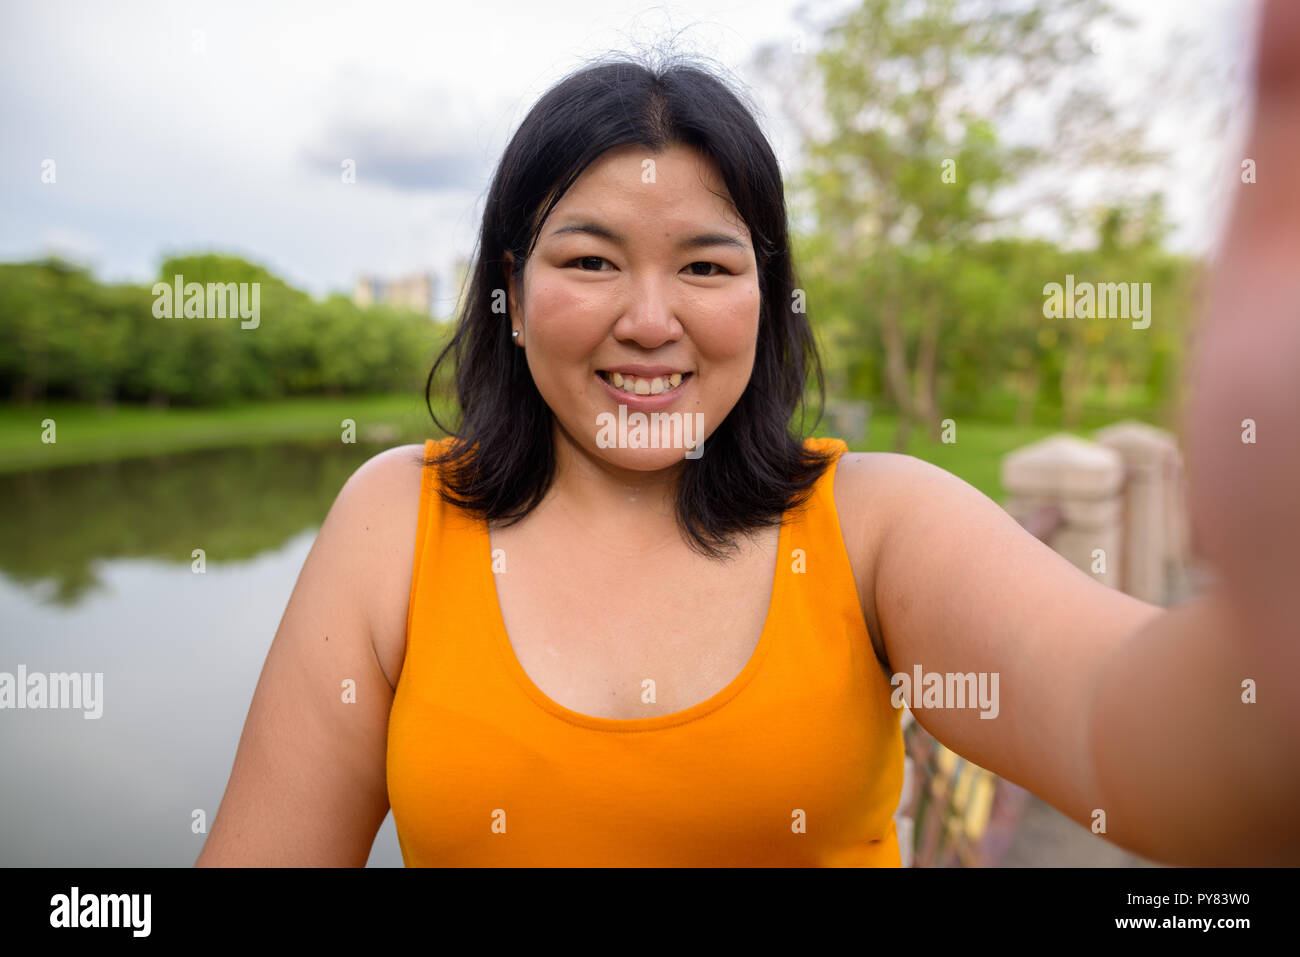 Personal point of view of beautiful overweight woman taking selfie in park Stock Photo